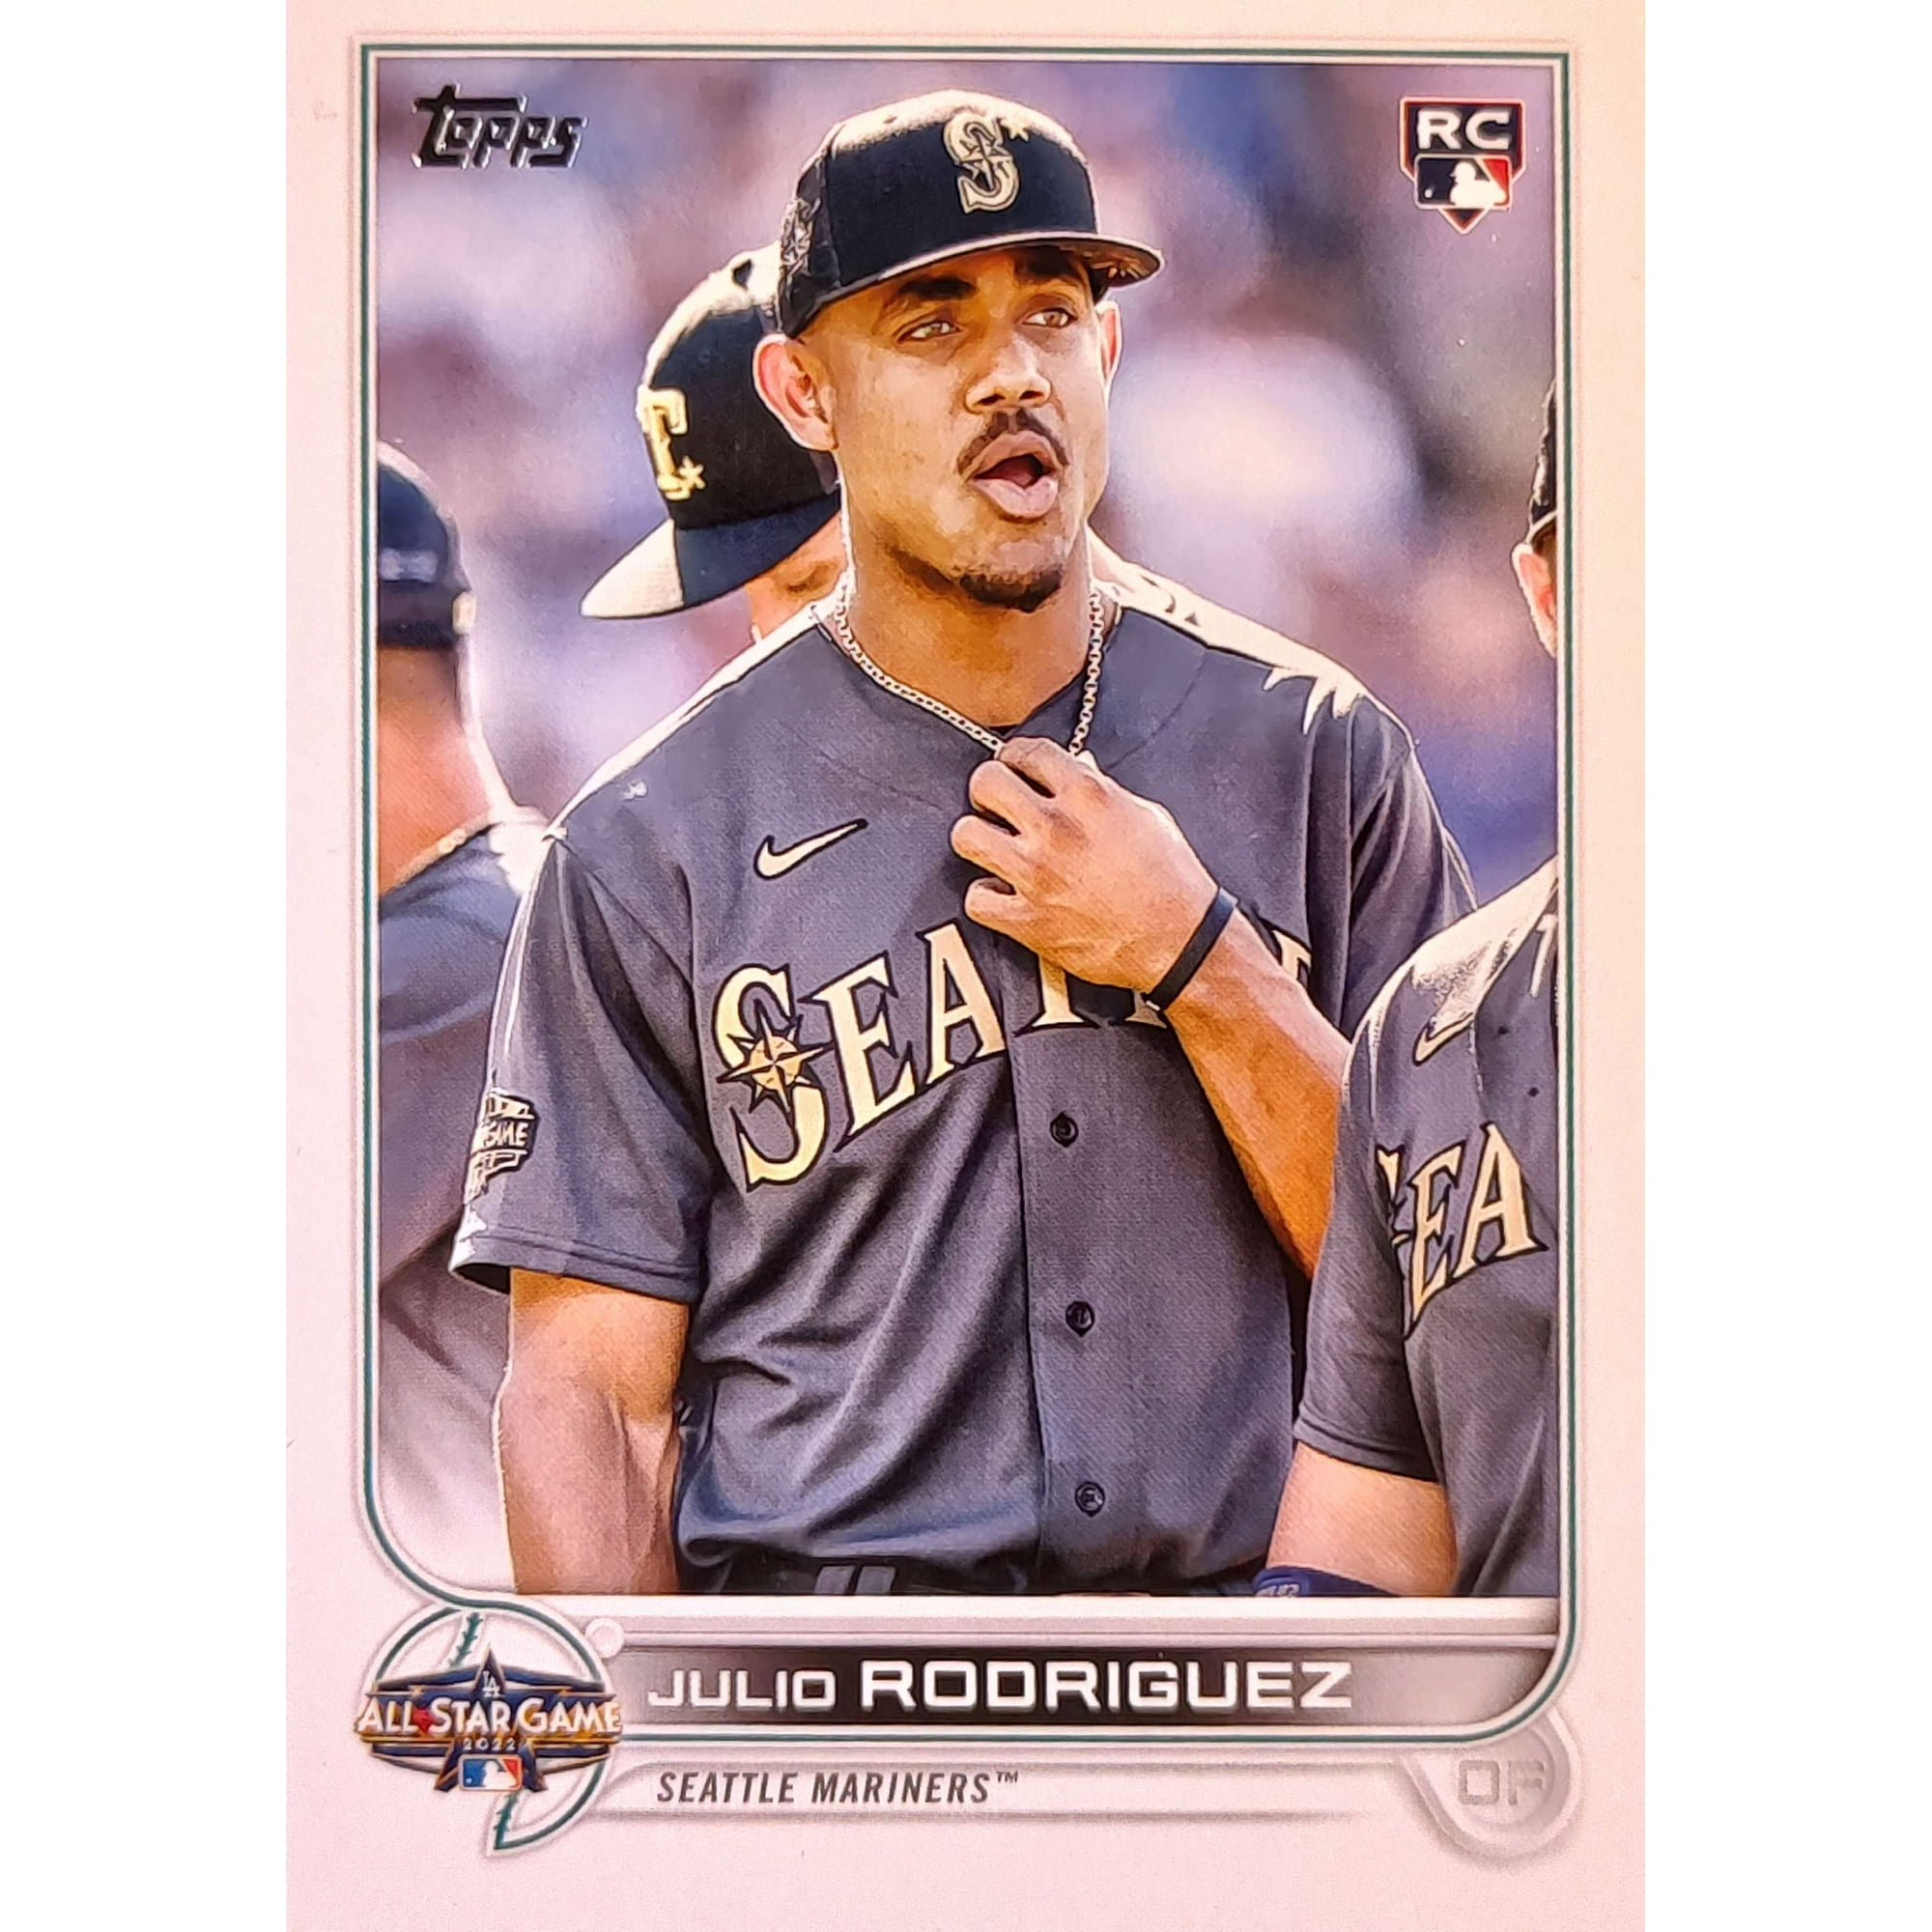 MLB 2022 Topps Update Julio Rodriguez Trading Card ASG-26 (Rookie) 